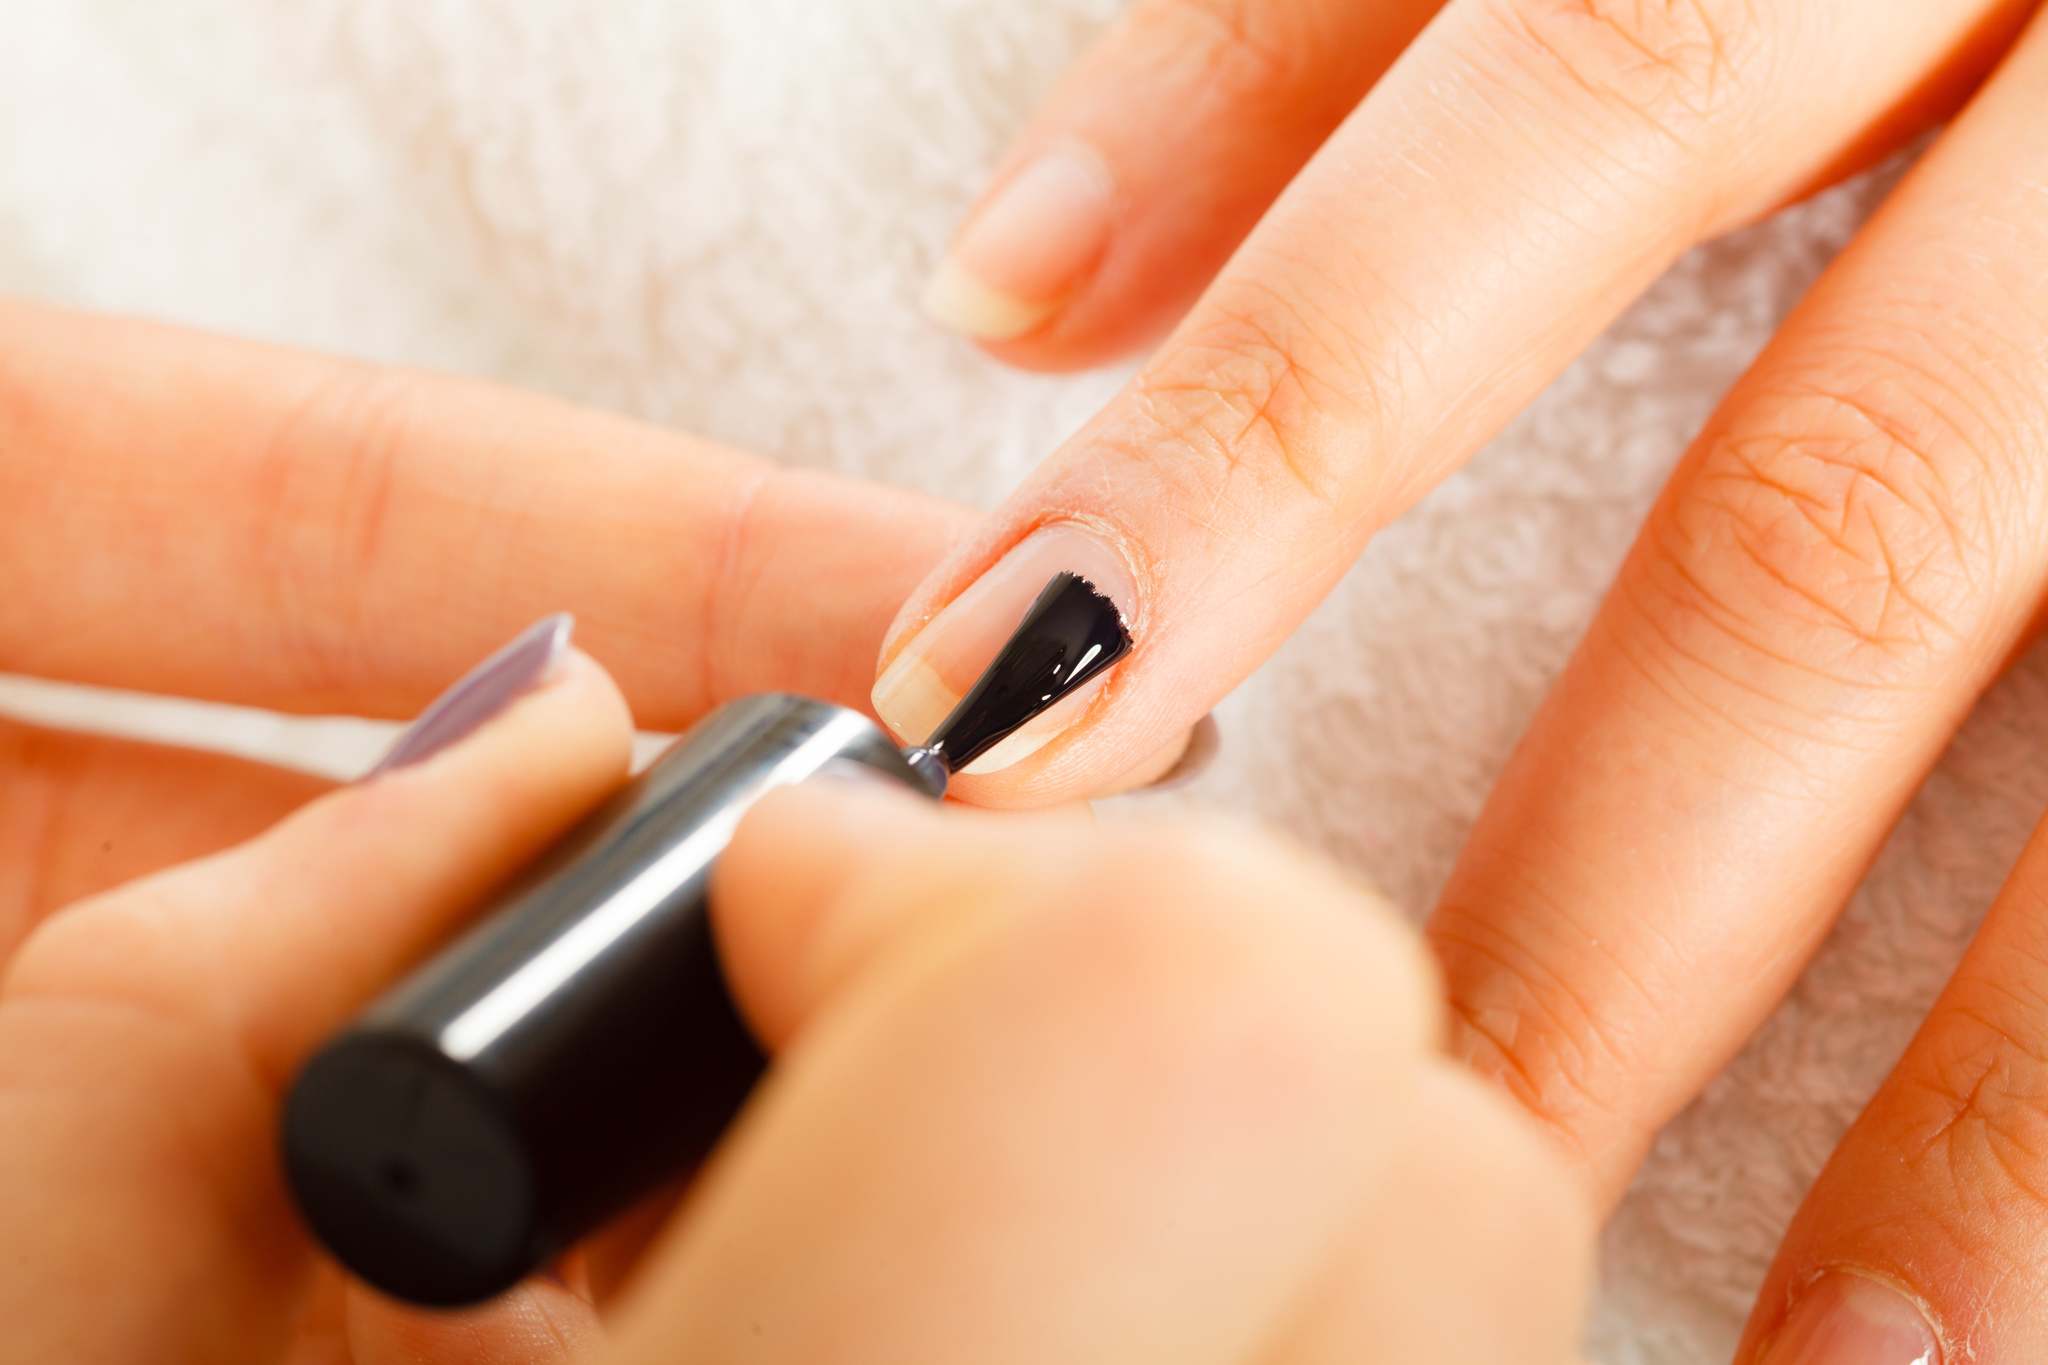 Here's What It Means if You Have White Spots on Your Nails | The Healthy